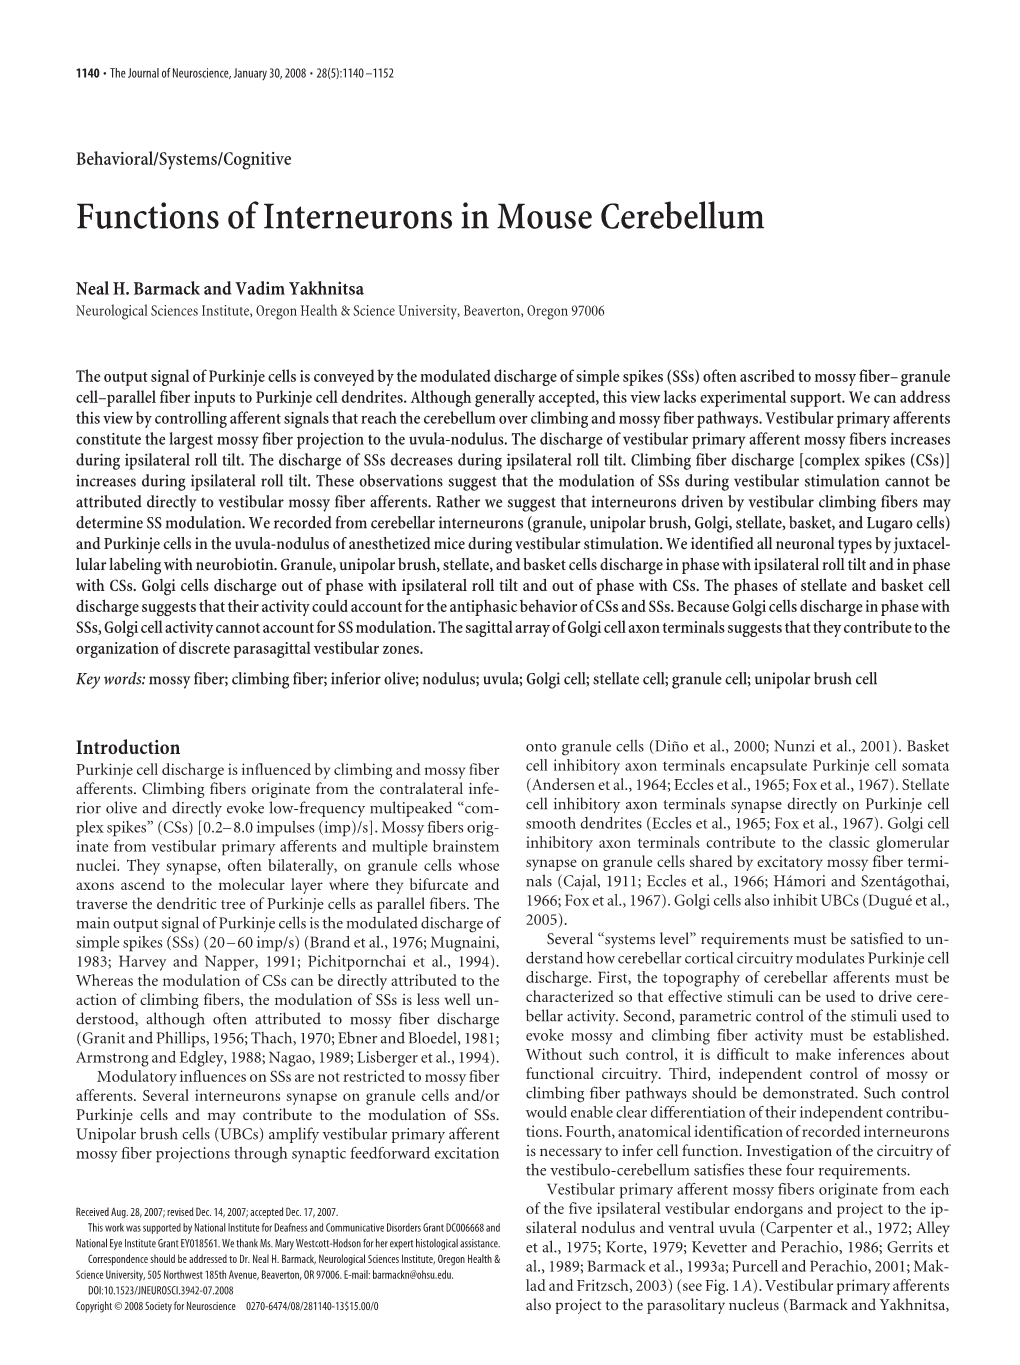 Functions of Interneurons in Mouse Cerebellum